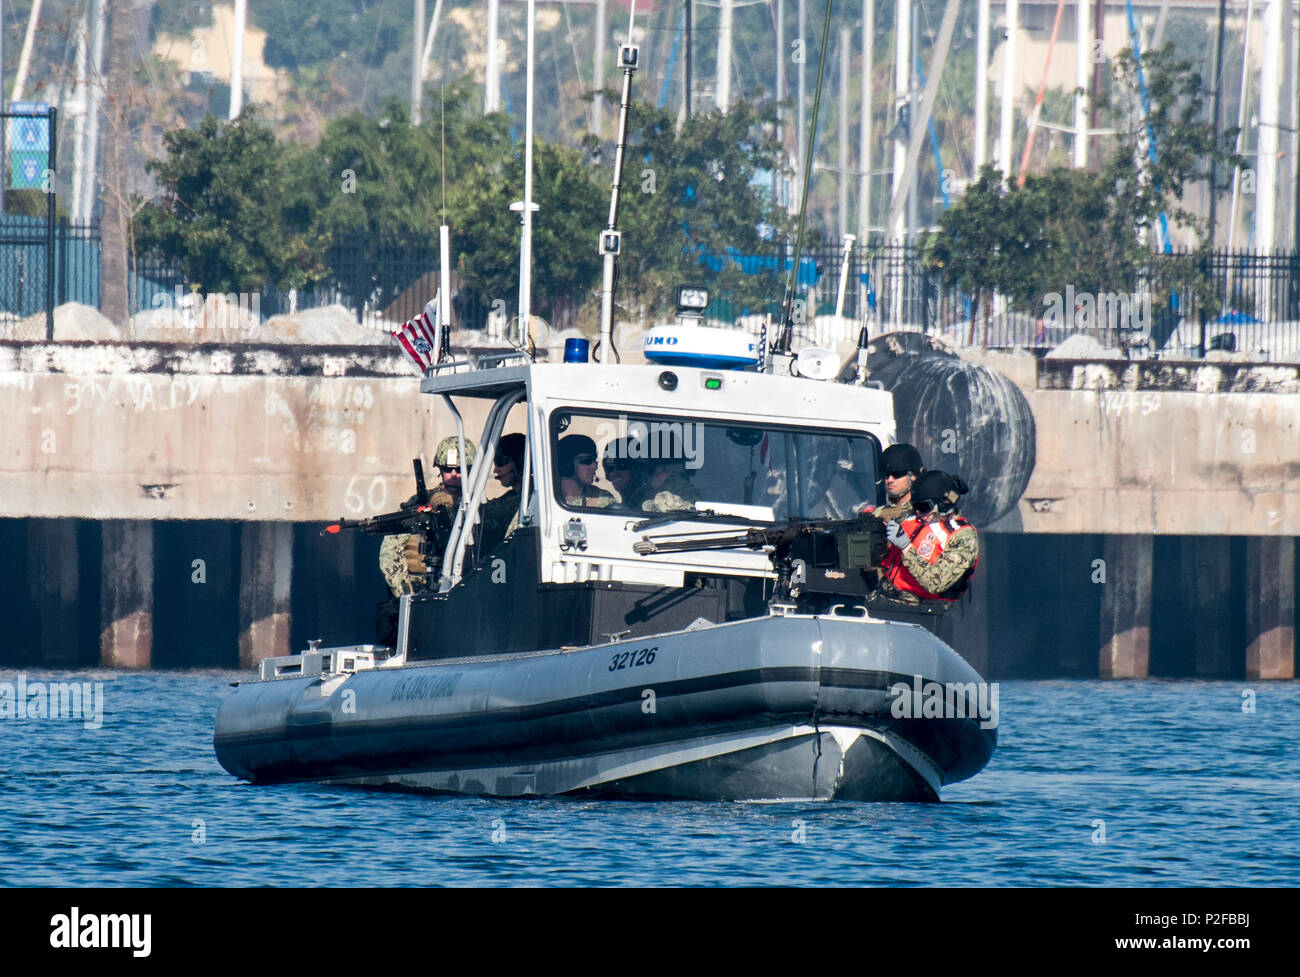 https://c8.alamy.com/comp/P2FBBJ/san-pedro-california-members-of-coast-guard-port-security-unit-311-based-in-san-pedro-conducted-a-military-training-exercise-in-the-port-of-los-angeles-on-september-17-2016-the-training-exercise-is-designed-to-test-and-maintain-the-proficiency-of-the-units-reserve-and-active-duty-members-during-the-drill-members-were-required-to-conduct-high-speed-small-boat-maneuvers-and-simulated-automatic-weapon-fire-us-coast-guard-photo-by-petty-officer-3rd-class-andrea-anderson-P2FBBJ.jpg